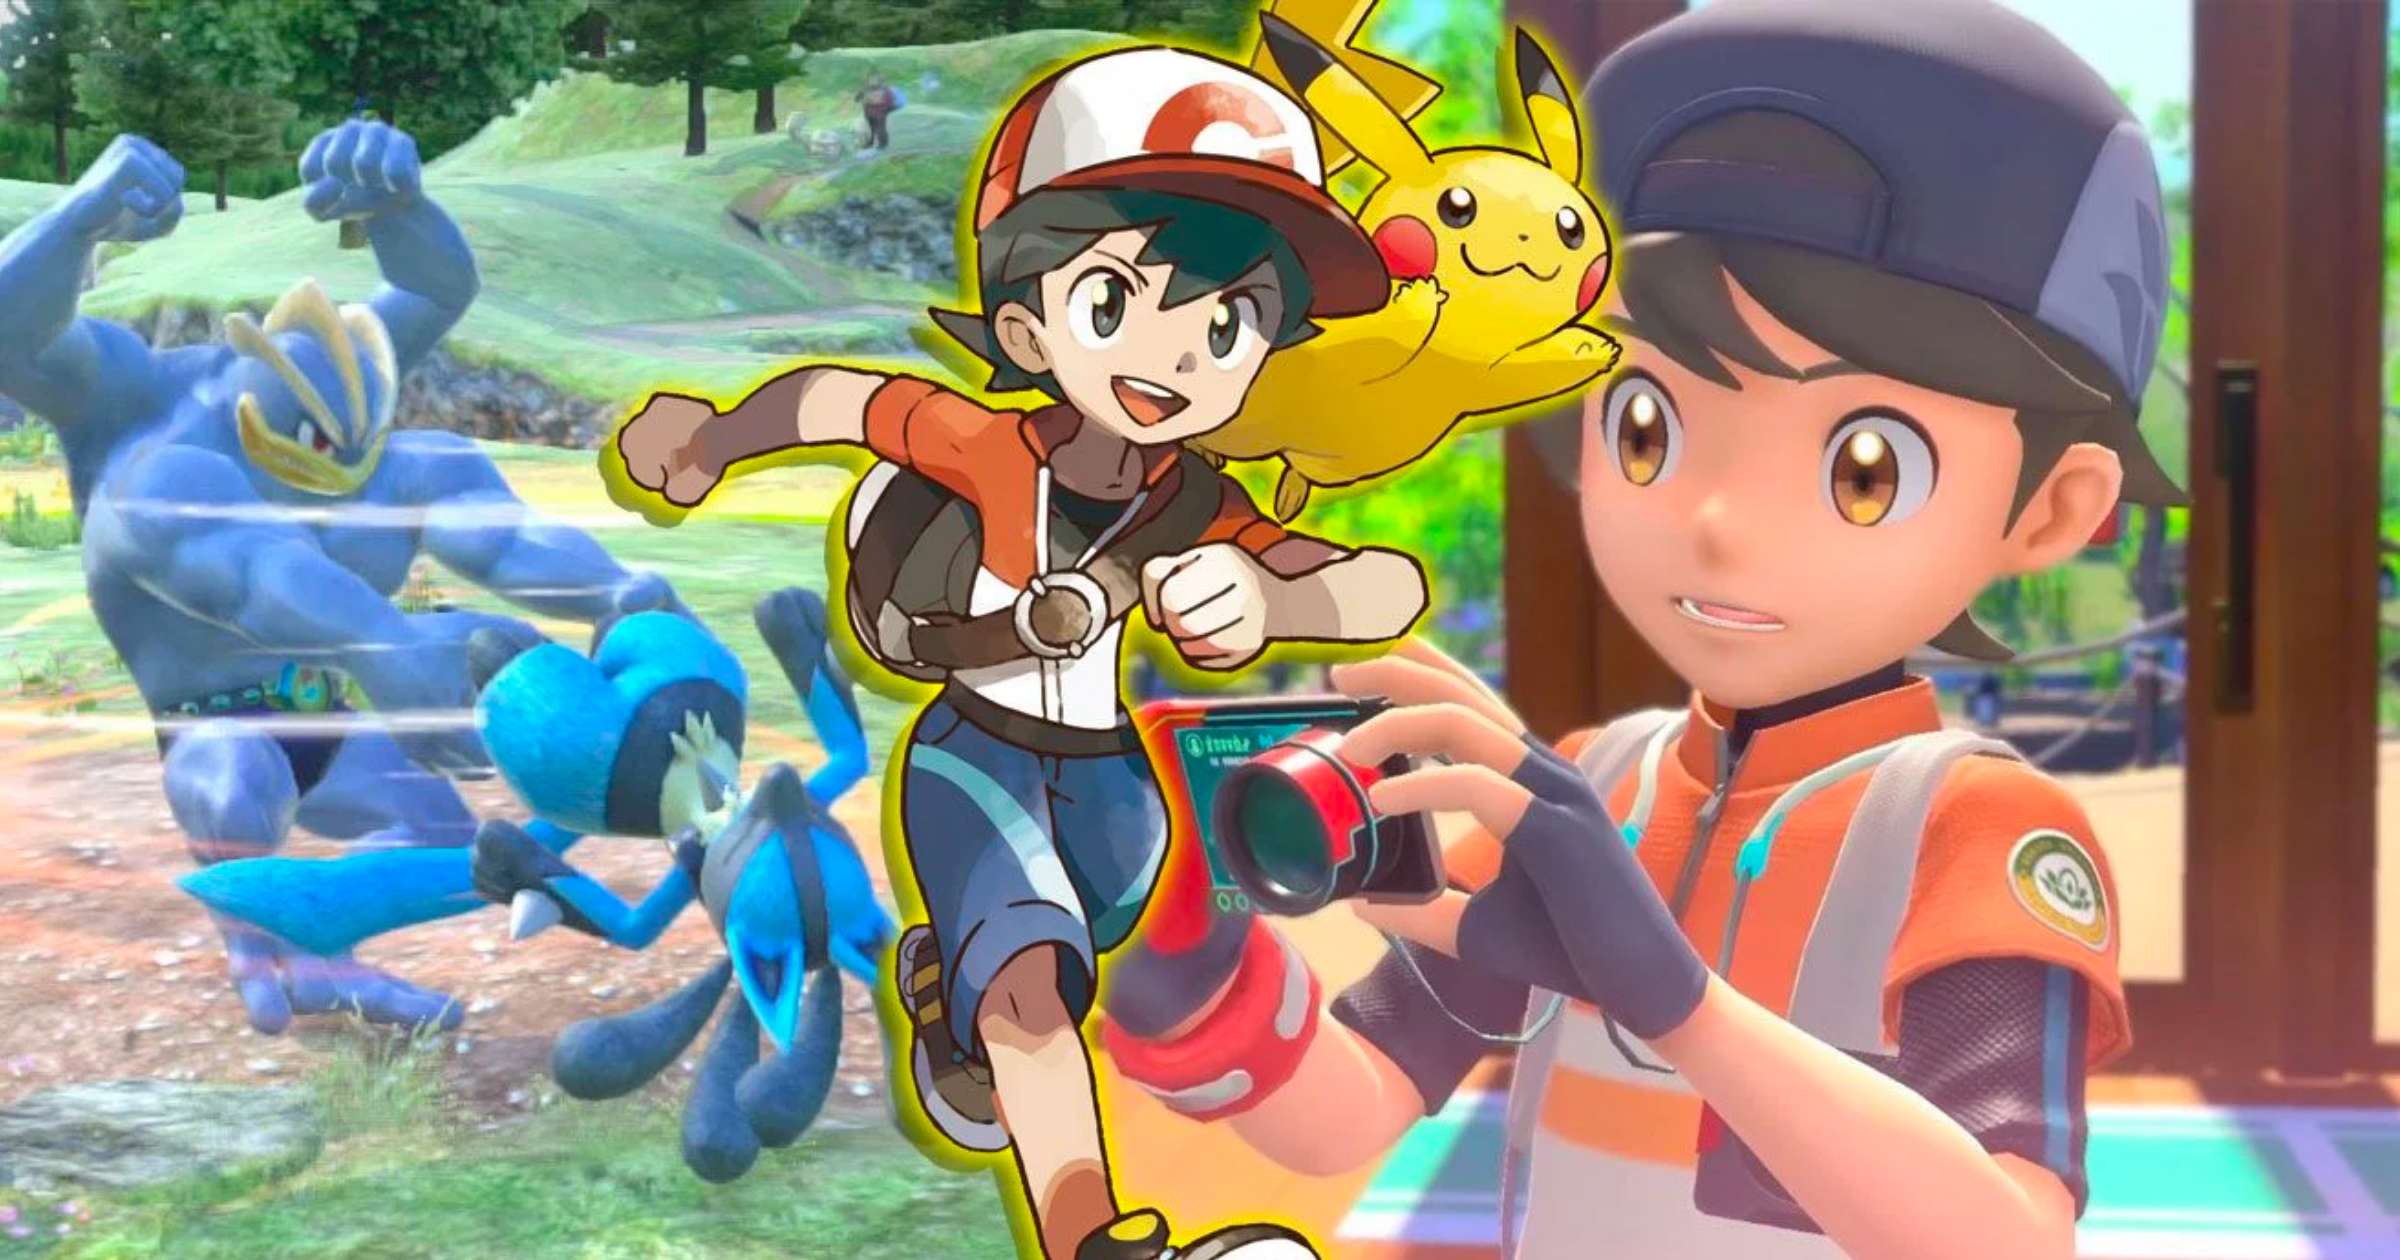 A Brand New 'Pokemon' Multiplayer Game Has Come To Switch For Free